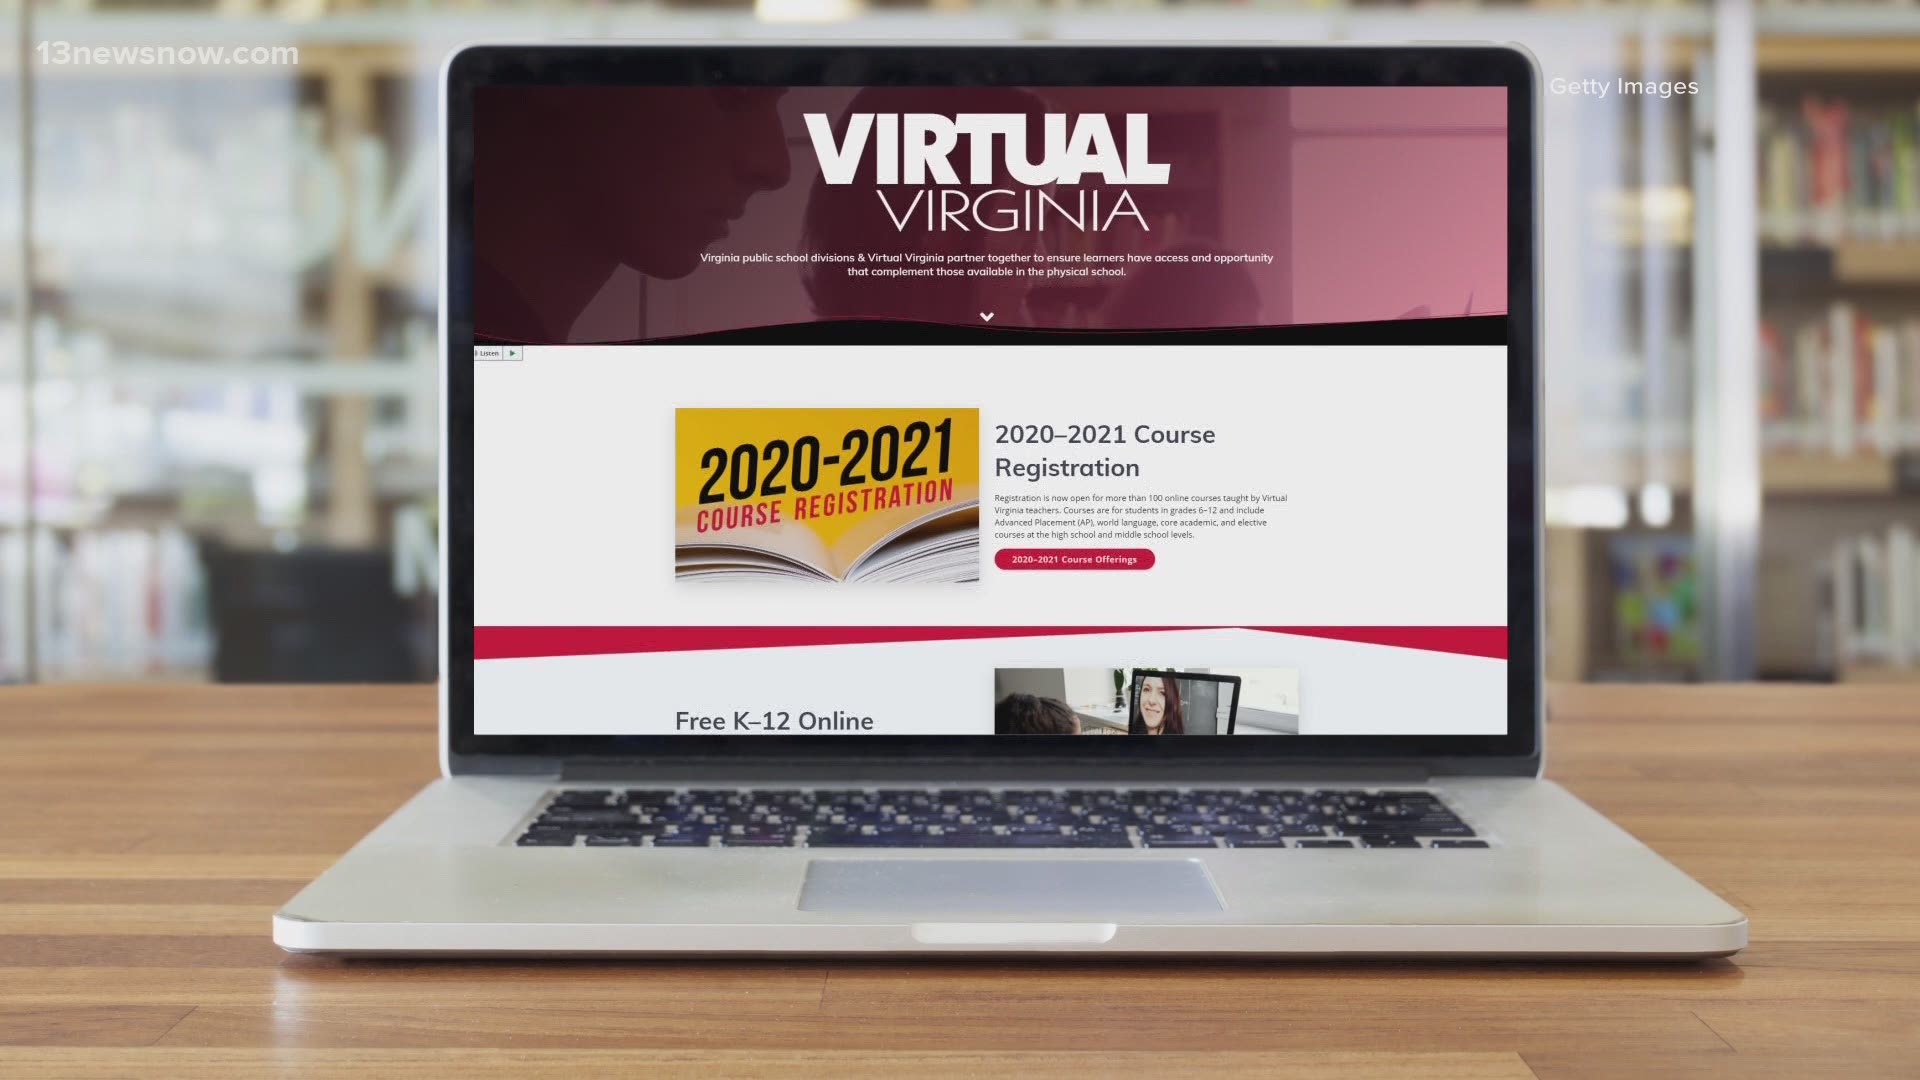 Back to School How will 'Virtual Virginia' work?